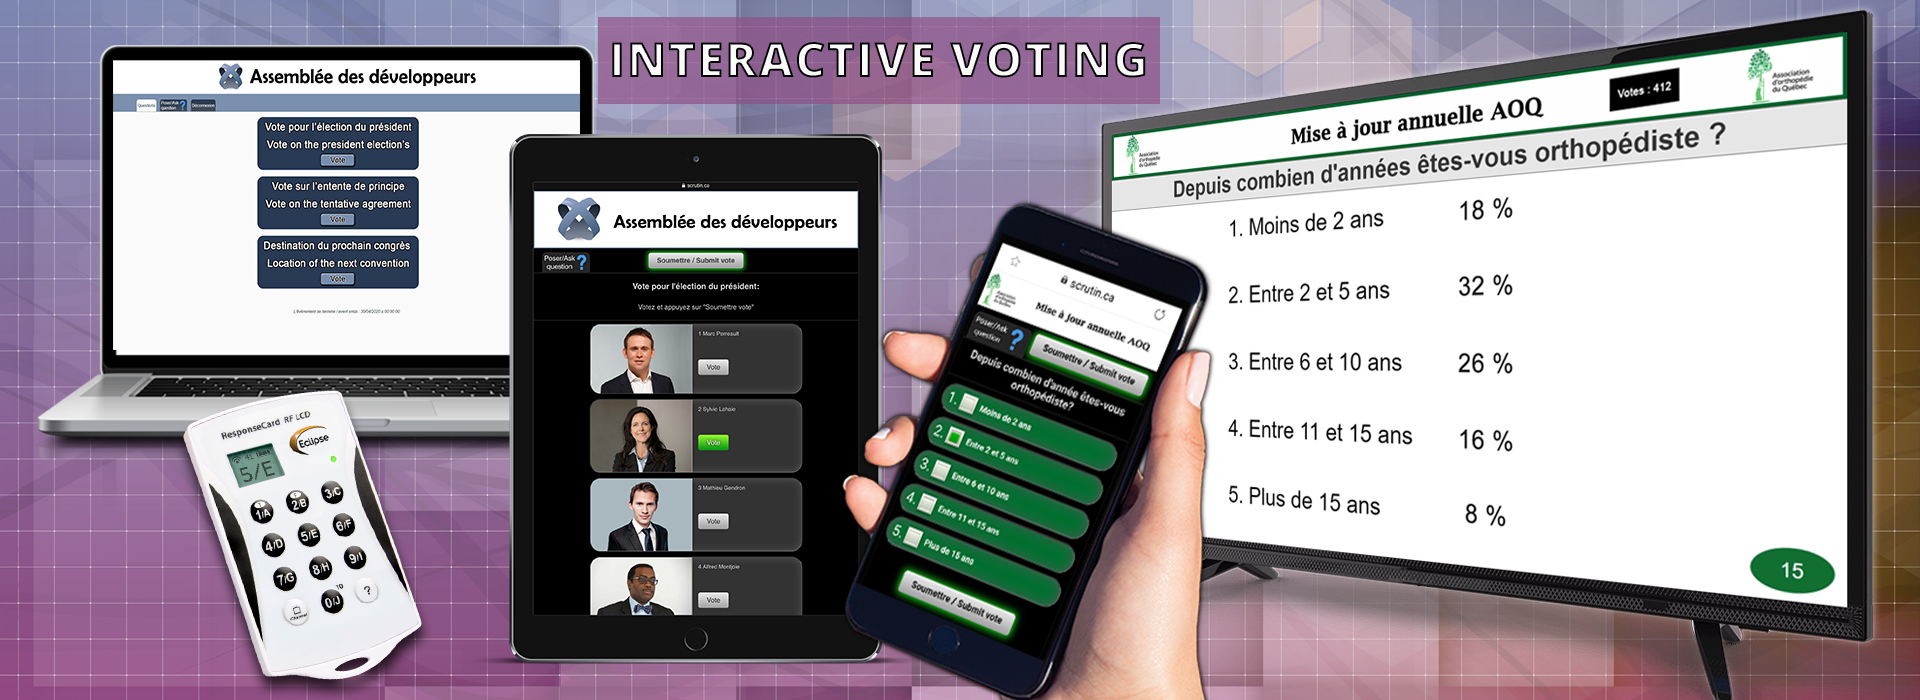 Interactive voting system